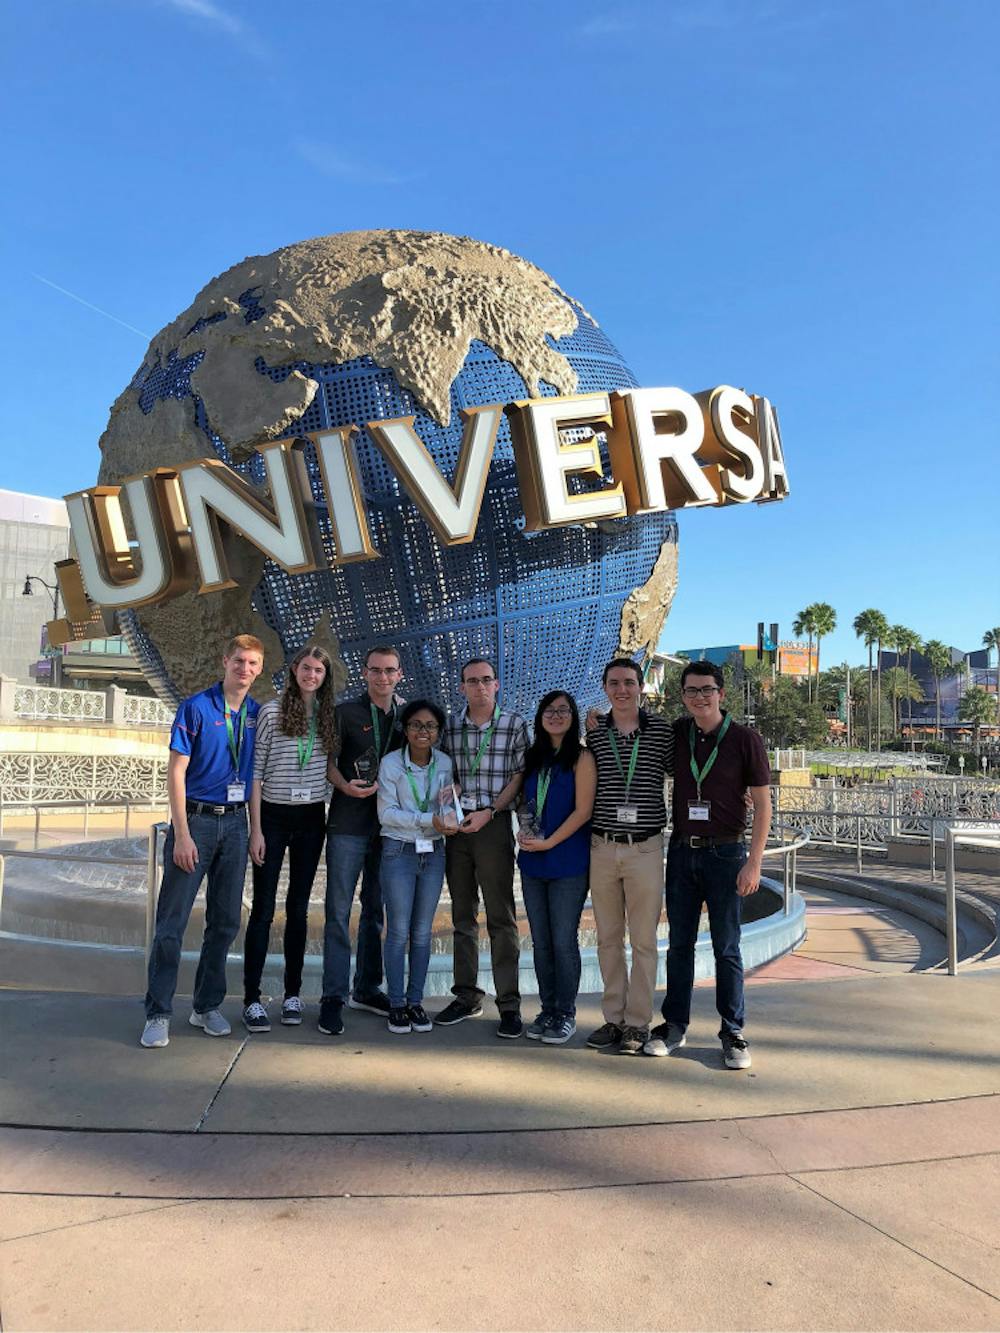 <p dir="ltr"><span>(From left to right) Matthew Musial, Sierra Simpson, Mark Lawrence, Andrea Wright, Justin Lawrence, Kaylyn Ling, Michael Breen and Kristofer Robinson hold their first place overall trophy at the</span> <span>Ryerson Invitational Thrill Design Competition at Universal Studios Florida.</span></p><p><span> </span></p>